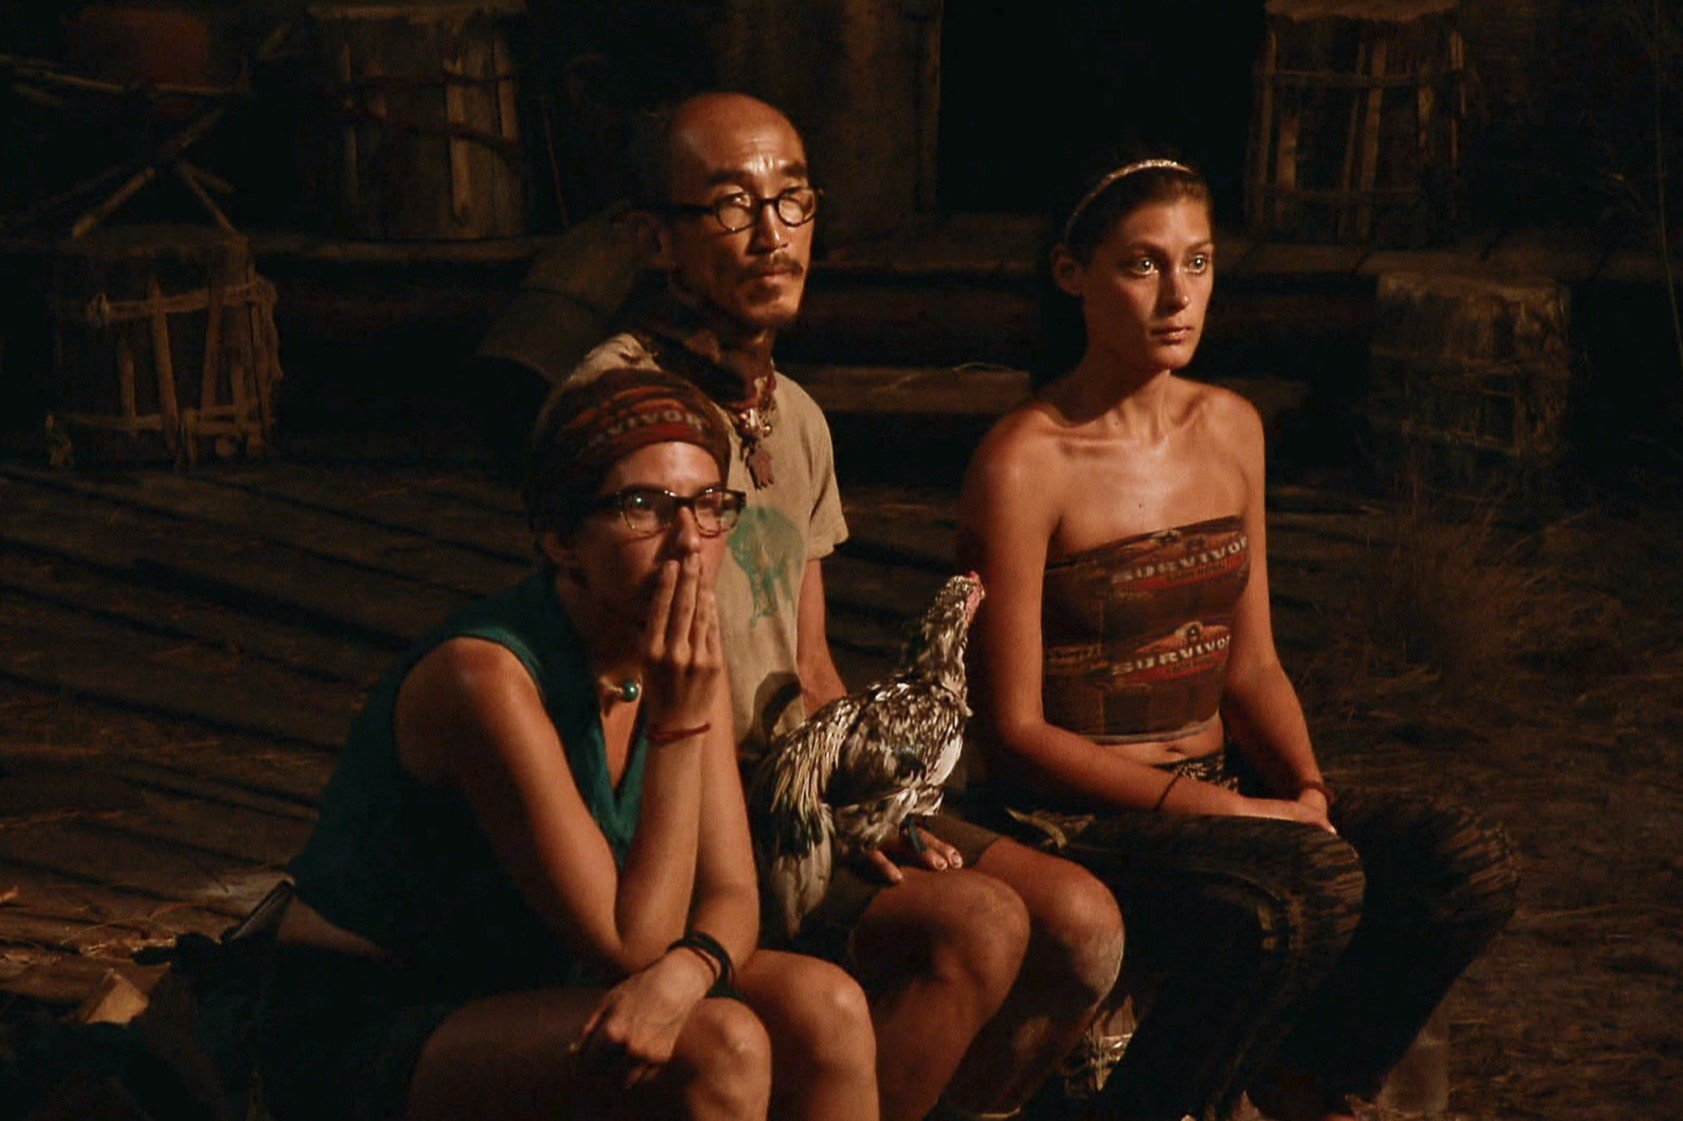 Aubry Bracco, Tai Trang, and Michele Fitzgerald, who was the 'Survivor' Season 32 winner, appear at the Final Tribal Council. Aubry wears a teal shirt and jean shorts. Tai wears a tan shirt and dark brown shorts. Michele wears her brown 'Survivor' buff as a shirt and dark pants.